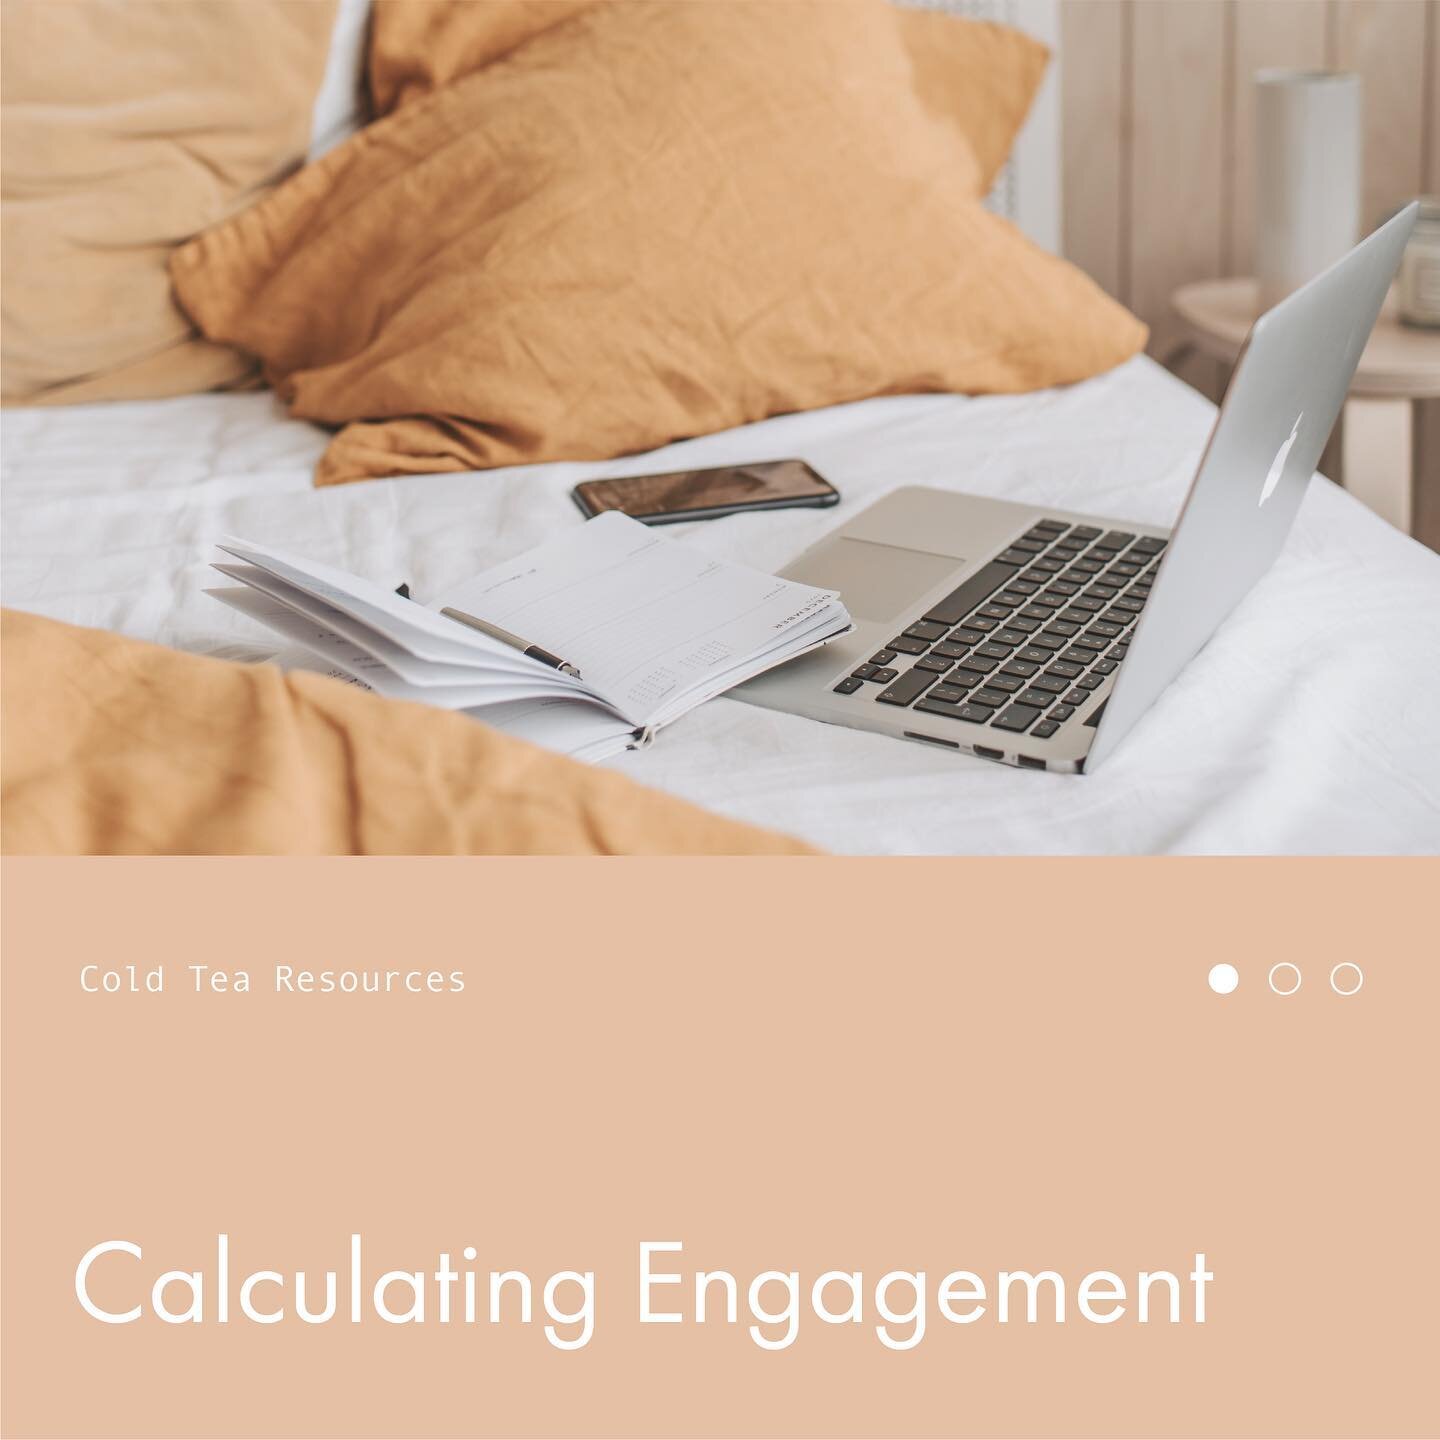 When it comes to calculating engagement there&rsquo;s a couple different ways you can do it and both are valuable in giving you similar, but different, insights on how your content is performing!

The Classic Method which compares engagement to your 